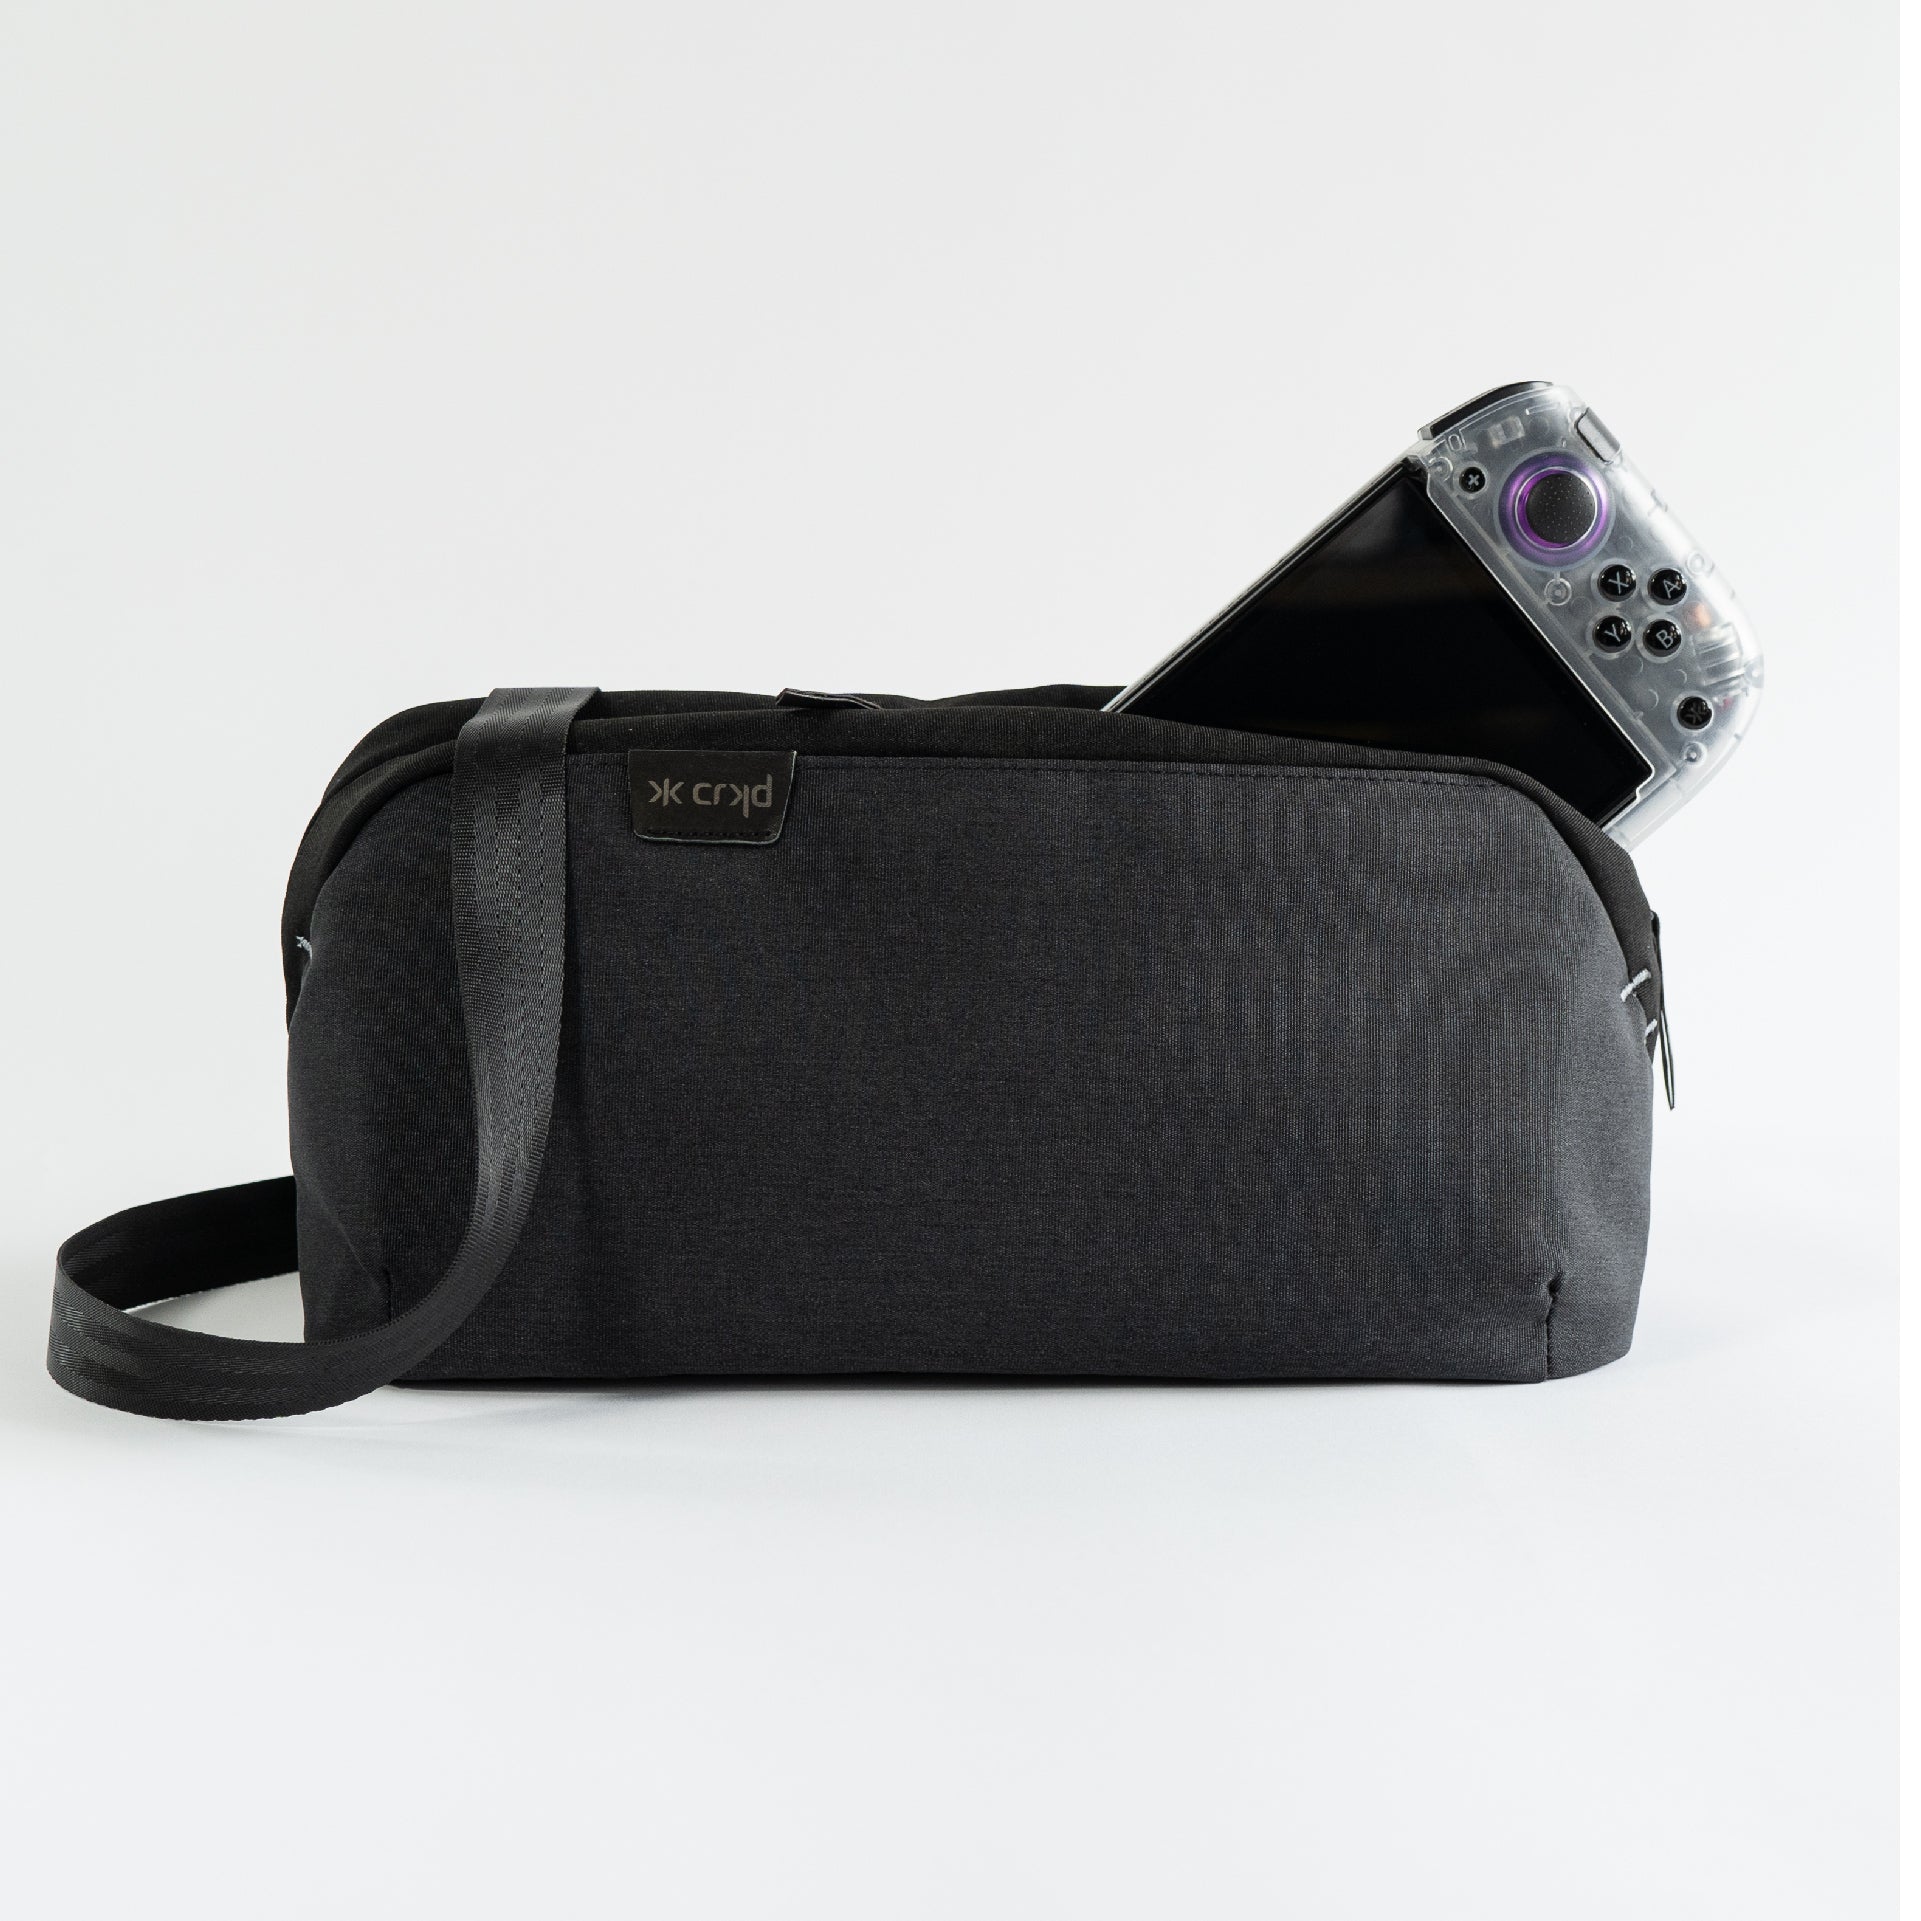 Pro Gaming Gear Carry Bag - Charcoal Grey